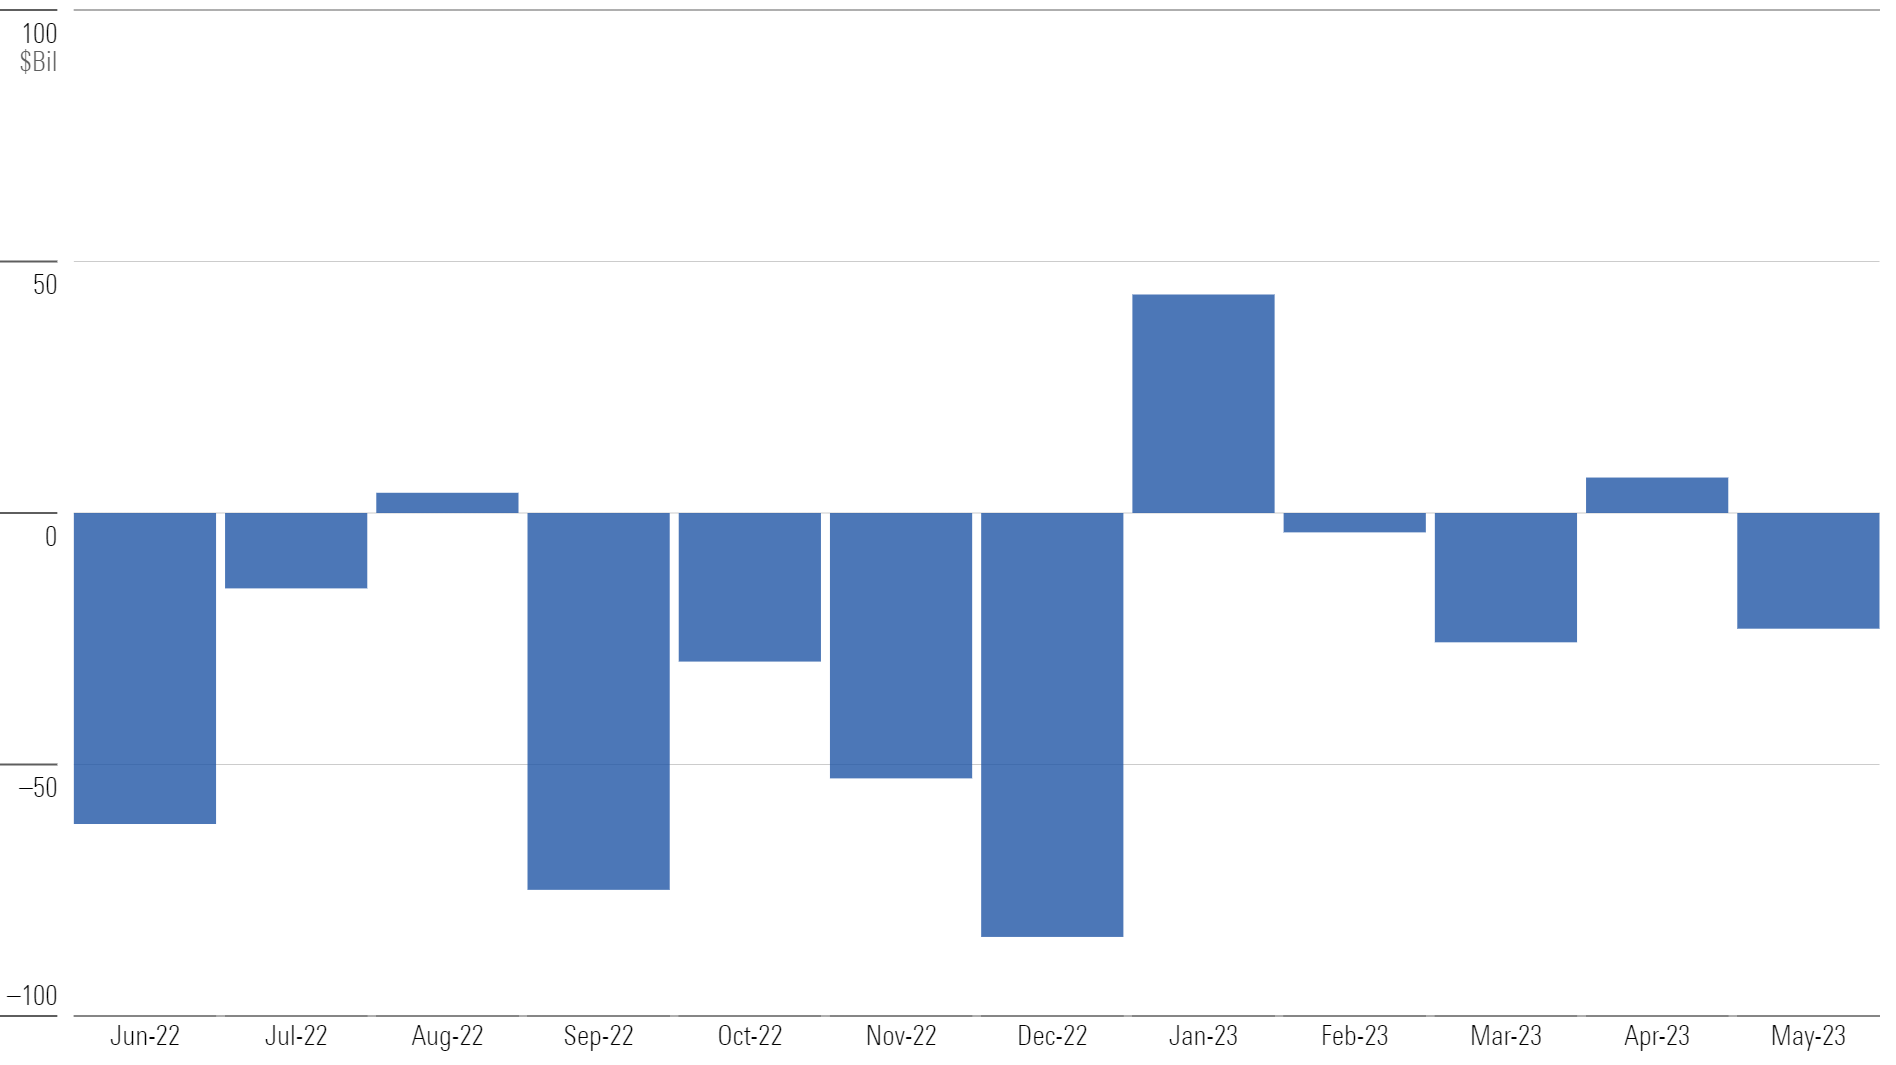 Bar chart of monthly flows for U.S. funds.